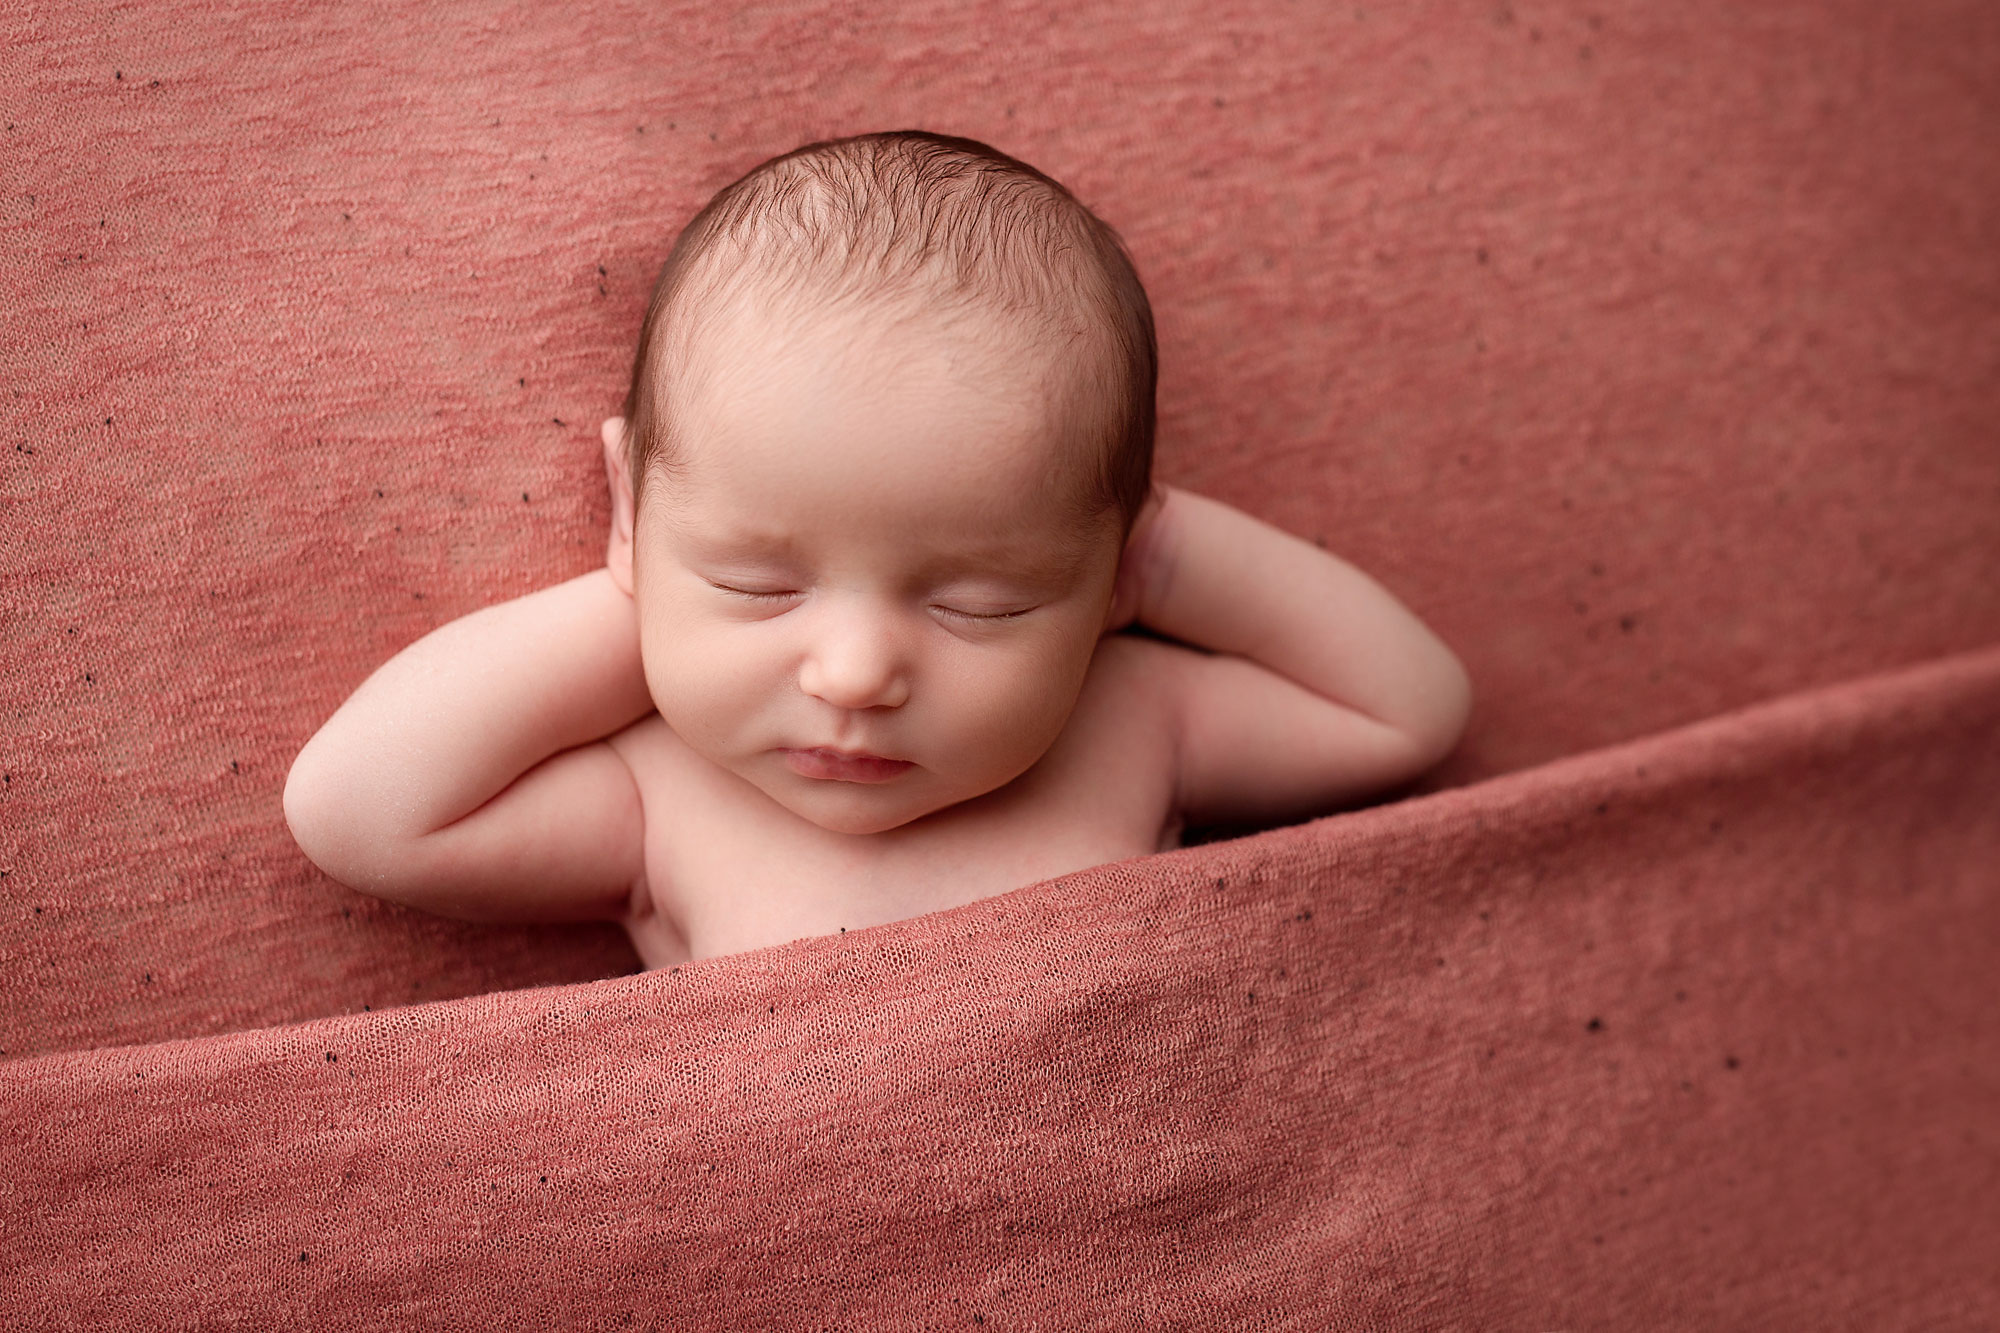 jersey city newborn photographer, baby girl sleeping with hands behind head on strawberry pink blanket